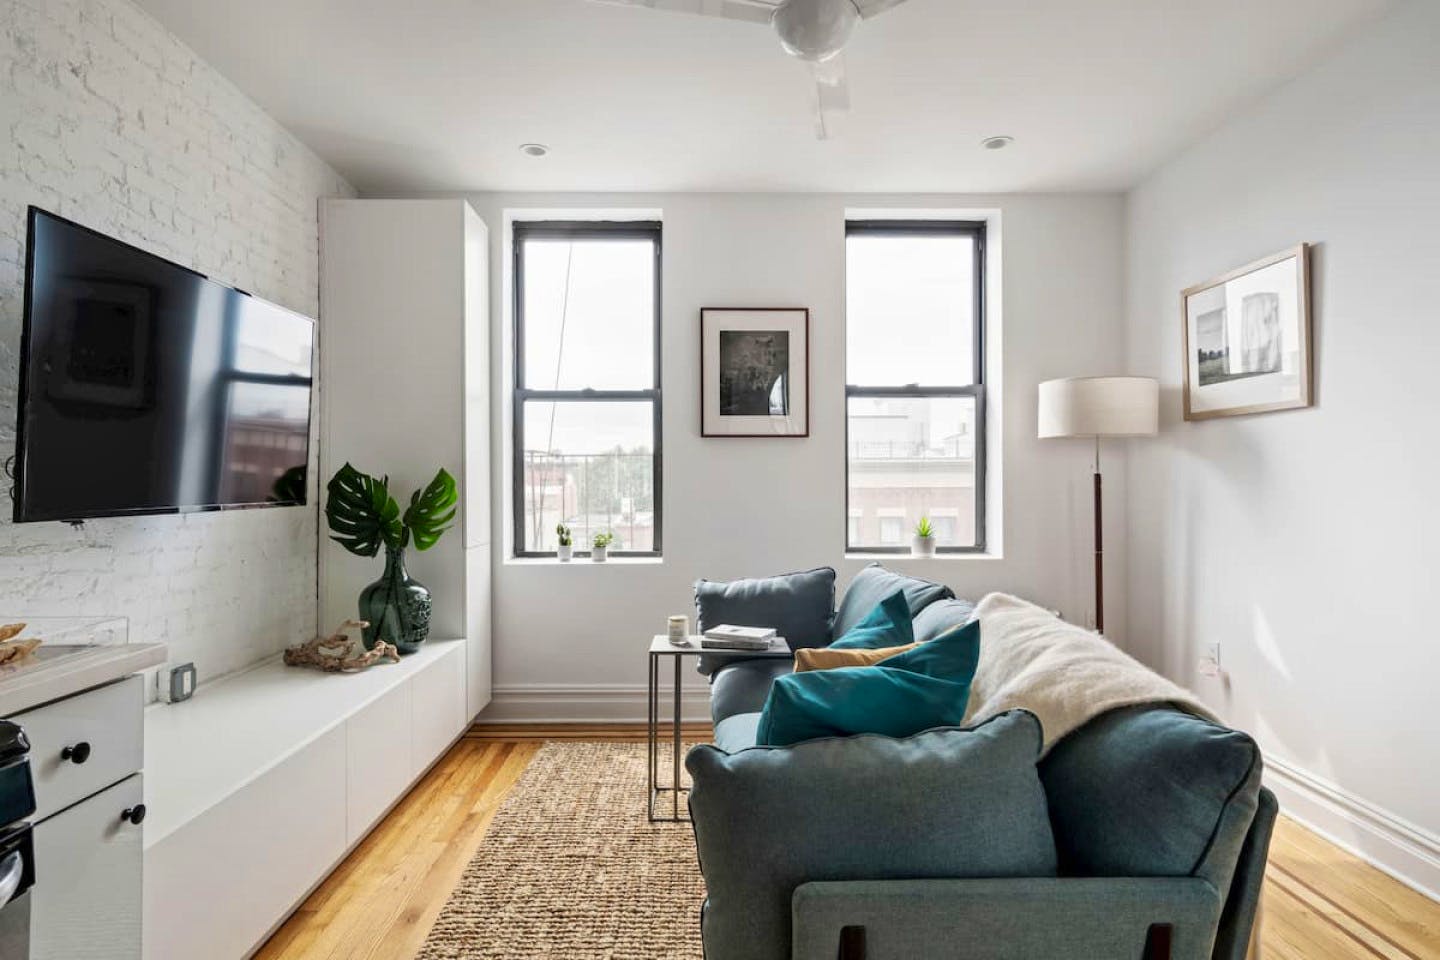 Stunning Bright Apt. w/ Terrace and Lounge Areas near Greenpoint Metro Station